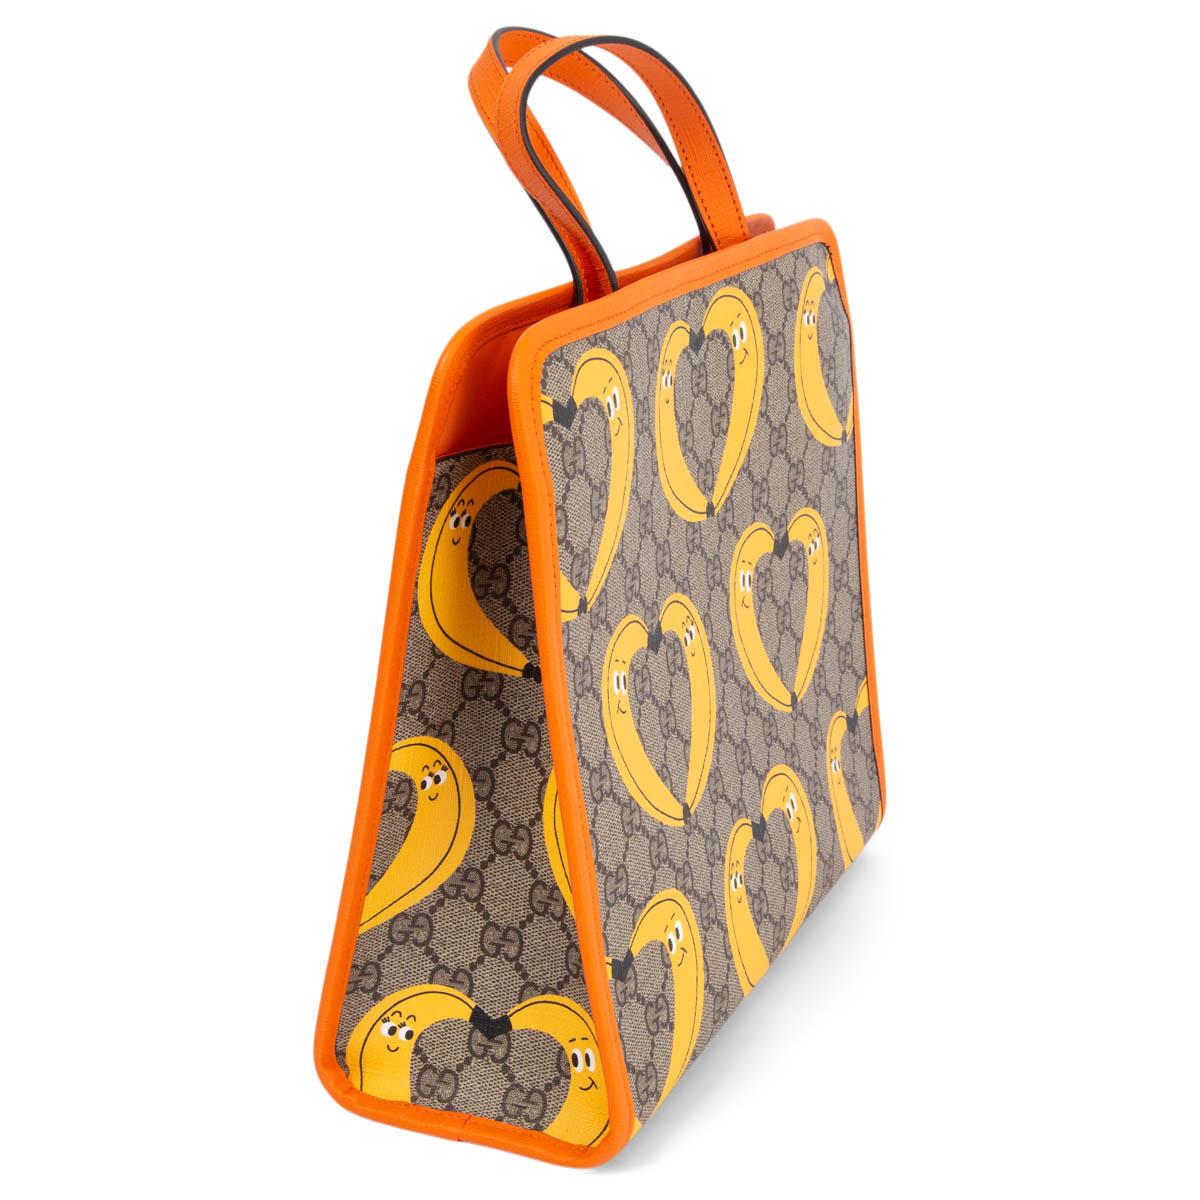 100% authentic Gucci banana heart printed handbag in grey, yellow, black, white and orange coated canvas. Opens with push button on top and is lined in orange nylon with one open pocket against the back. Brand new. 

Measurements
Height	25cm